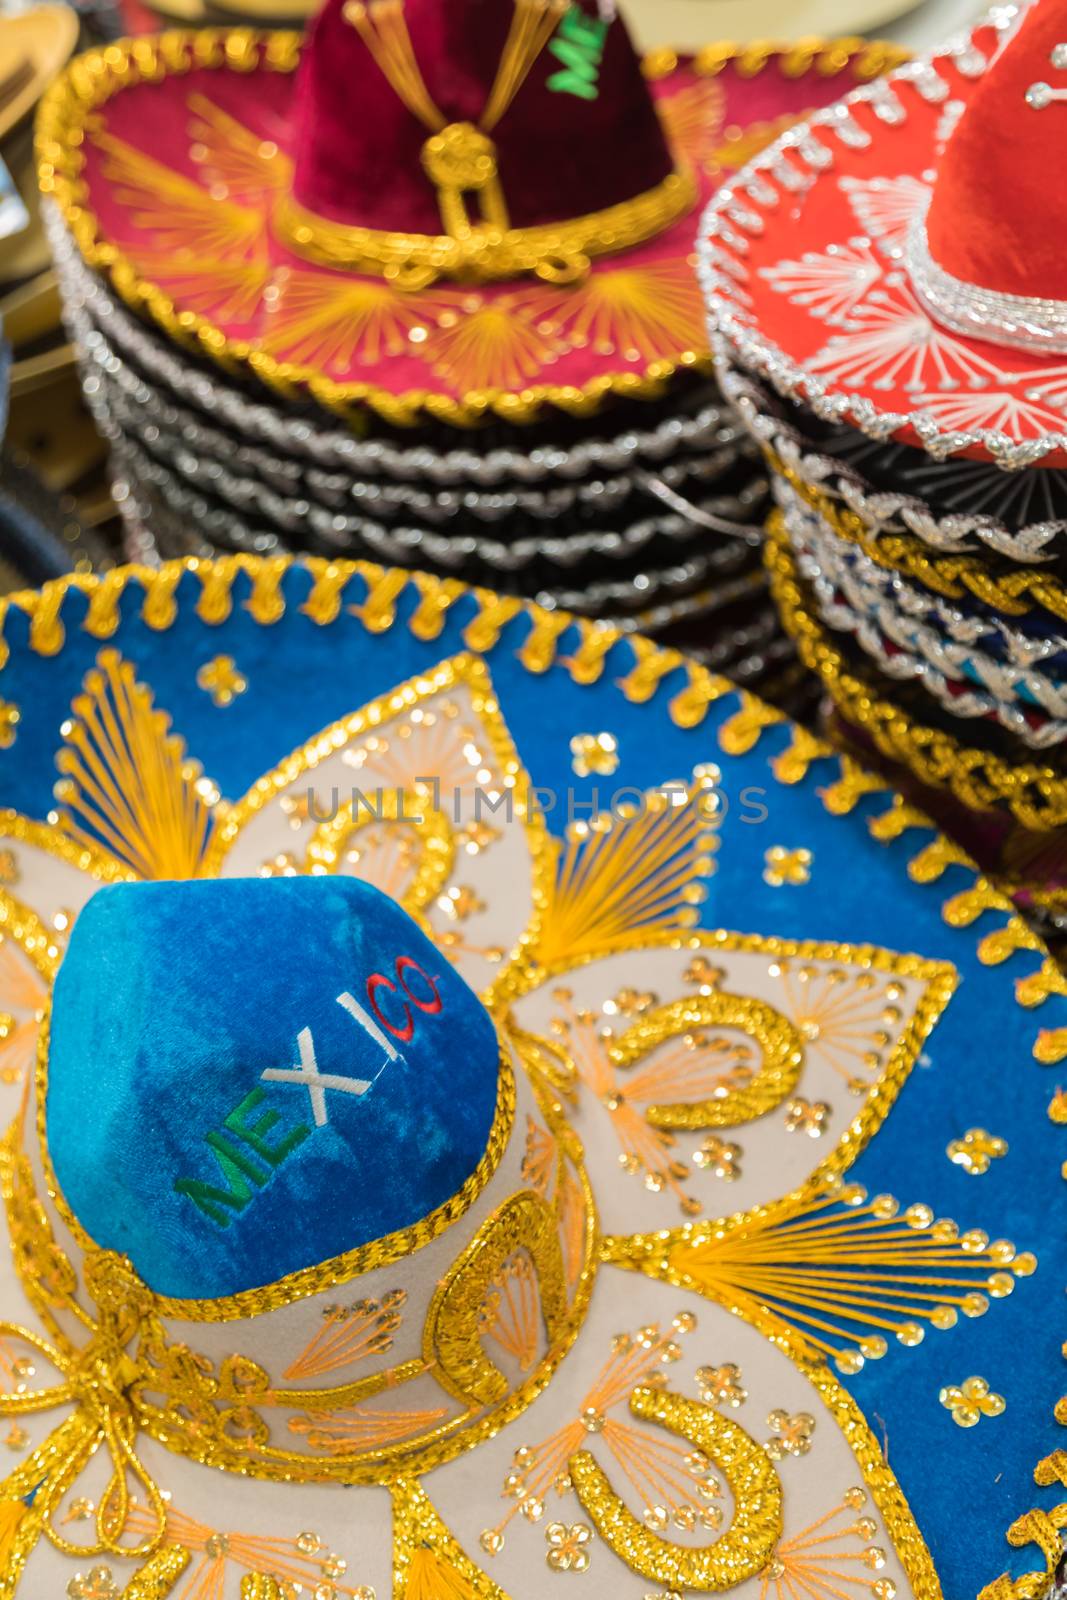 Variety of Sombreros On Sale By Local Mexico Vendors by Feverpitched